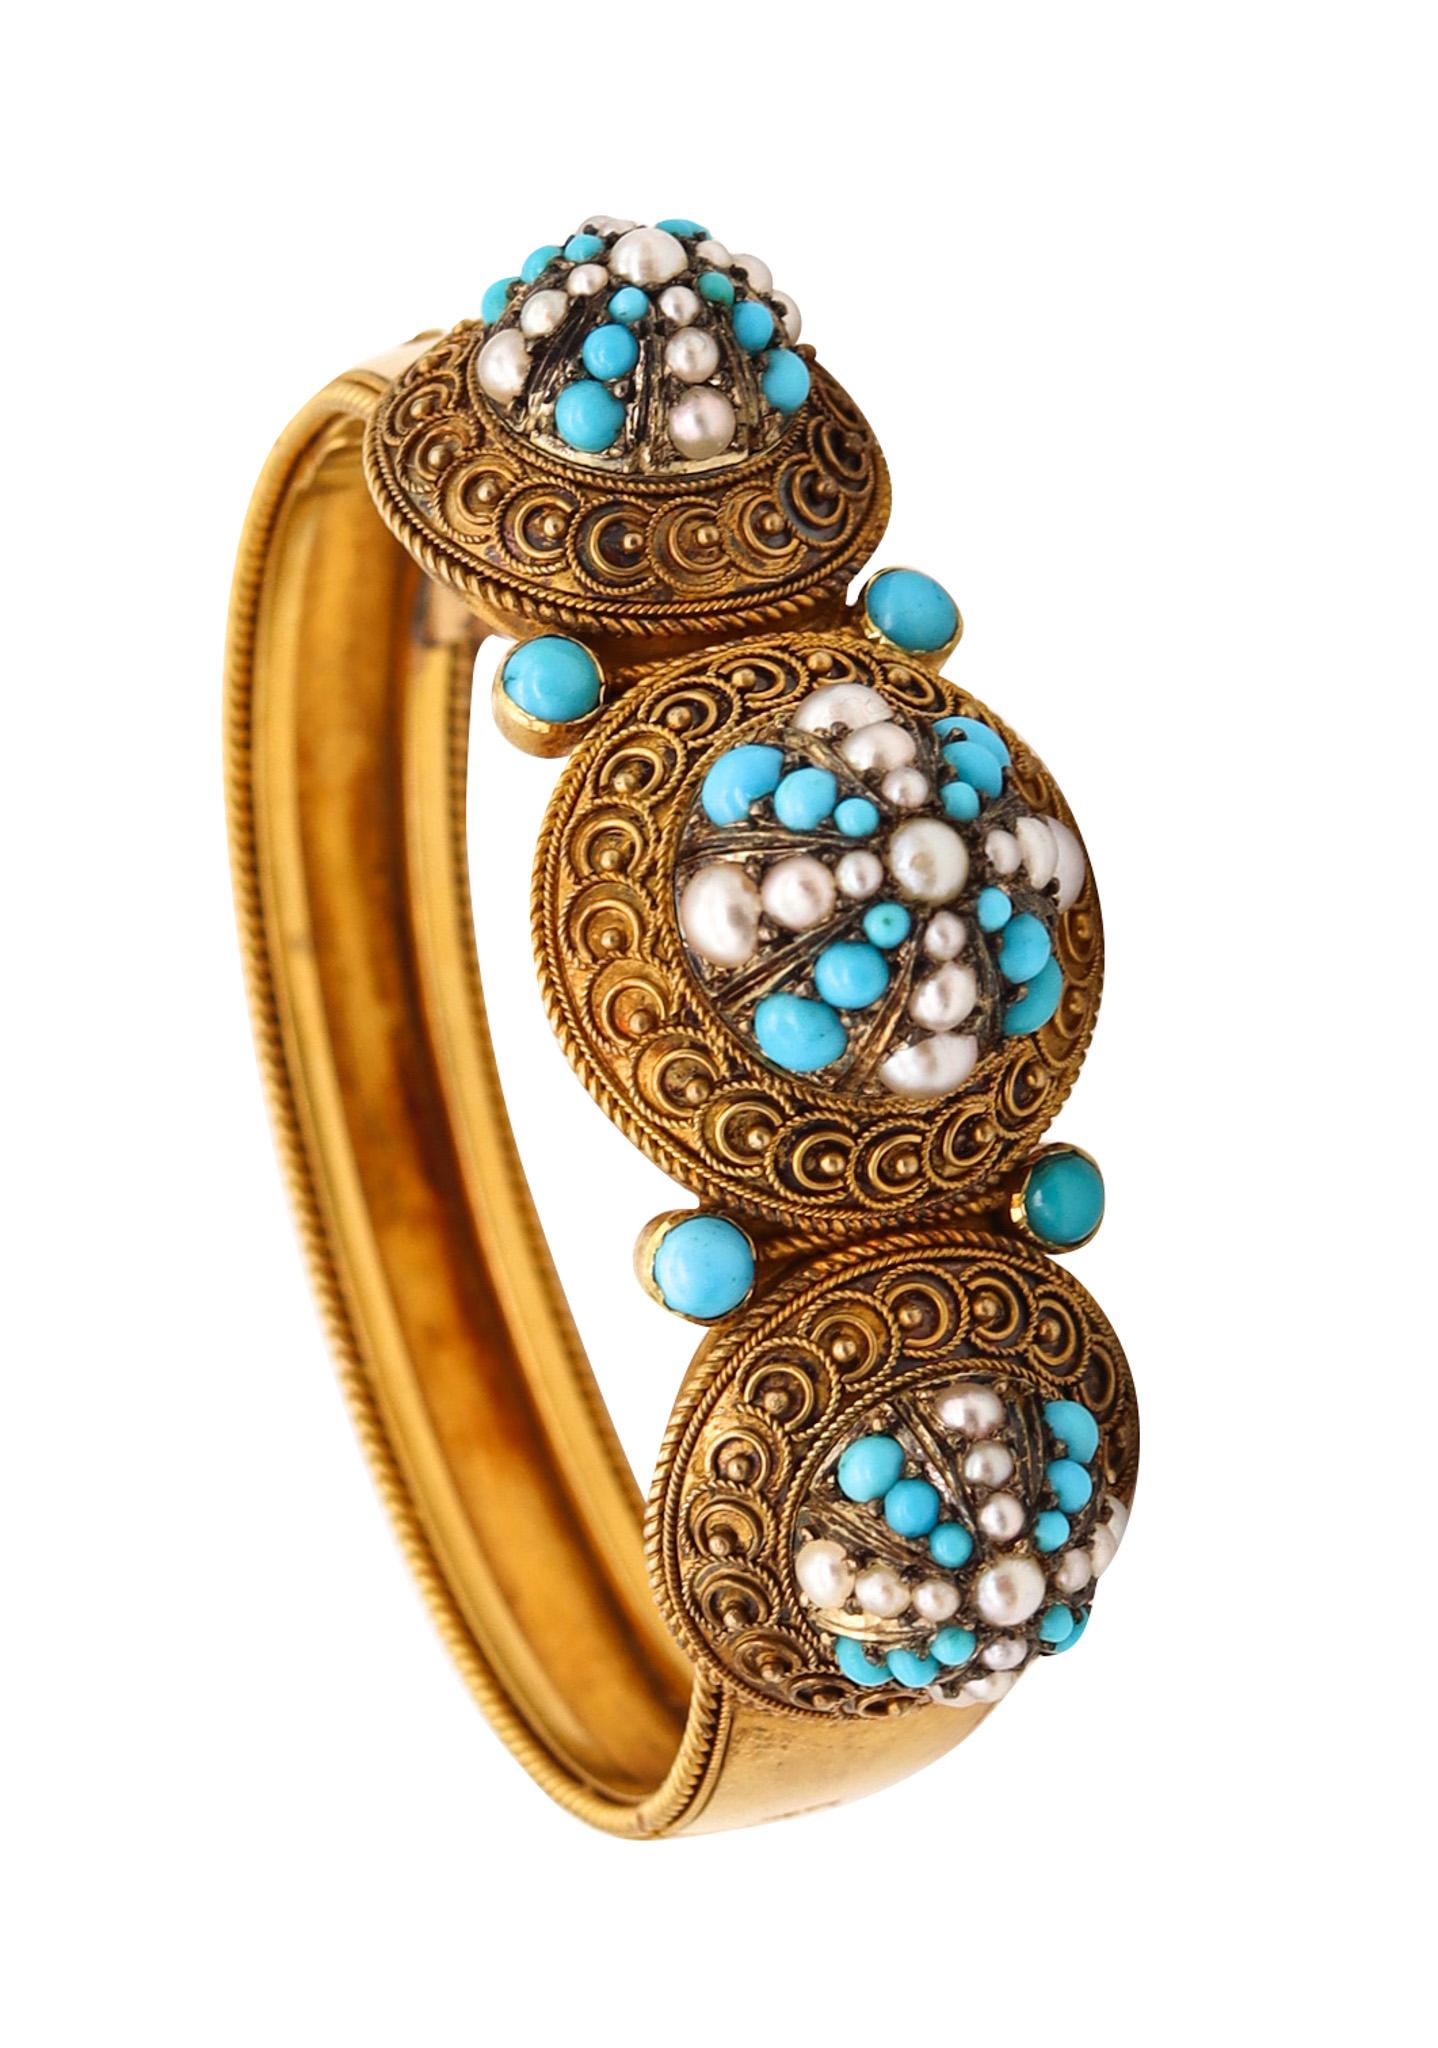 Victorian 1880 Etruscan Revival Bracelet in 15kt Gold with Turquoises and Pearls